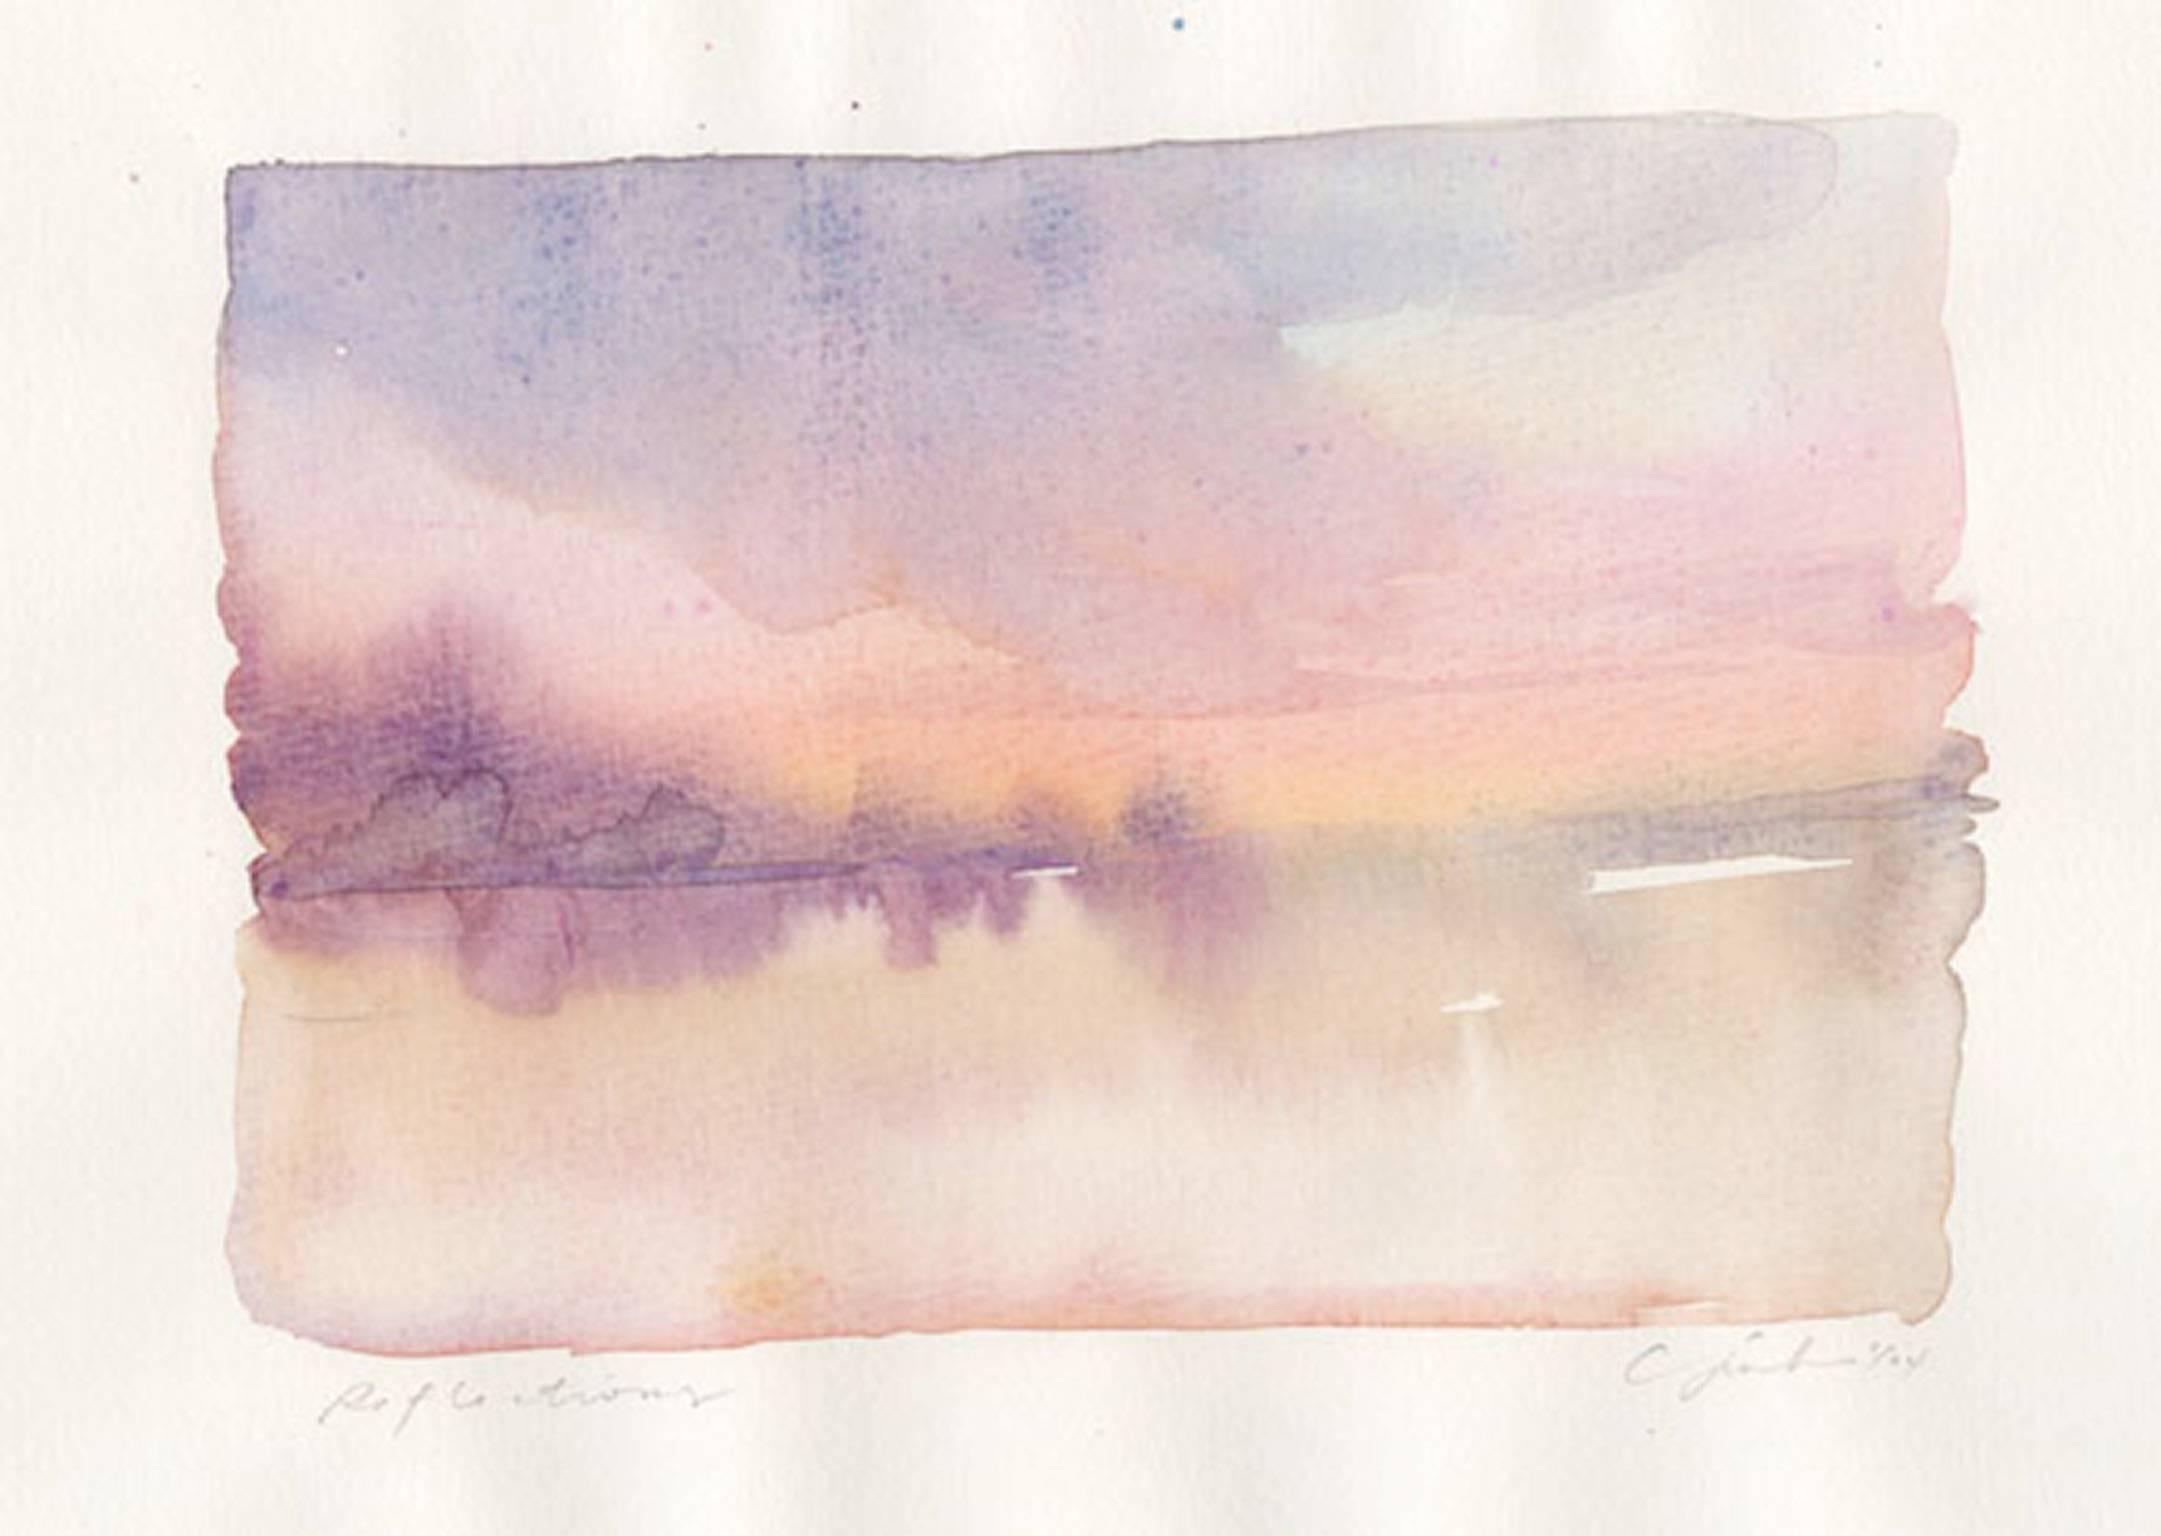 "Reflections" is an original watercolor painting on Holbein watercolor paper. The artist, Craig Lueck, signed the piece in the lower right and titled it in the lower left in pencil. It depicts a colorful sky and treeline reflecting in water. The